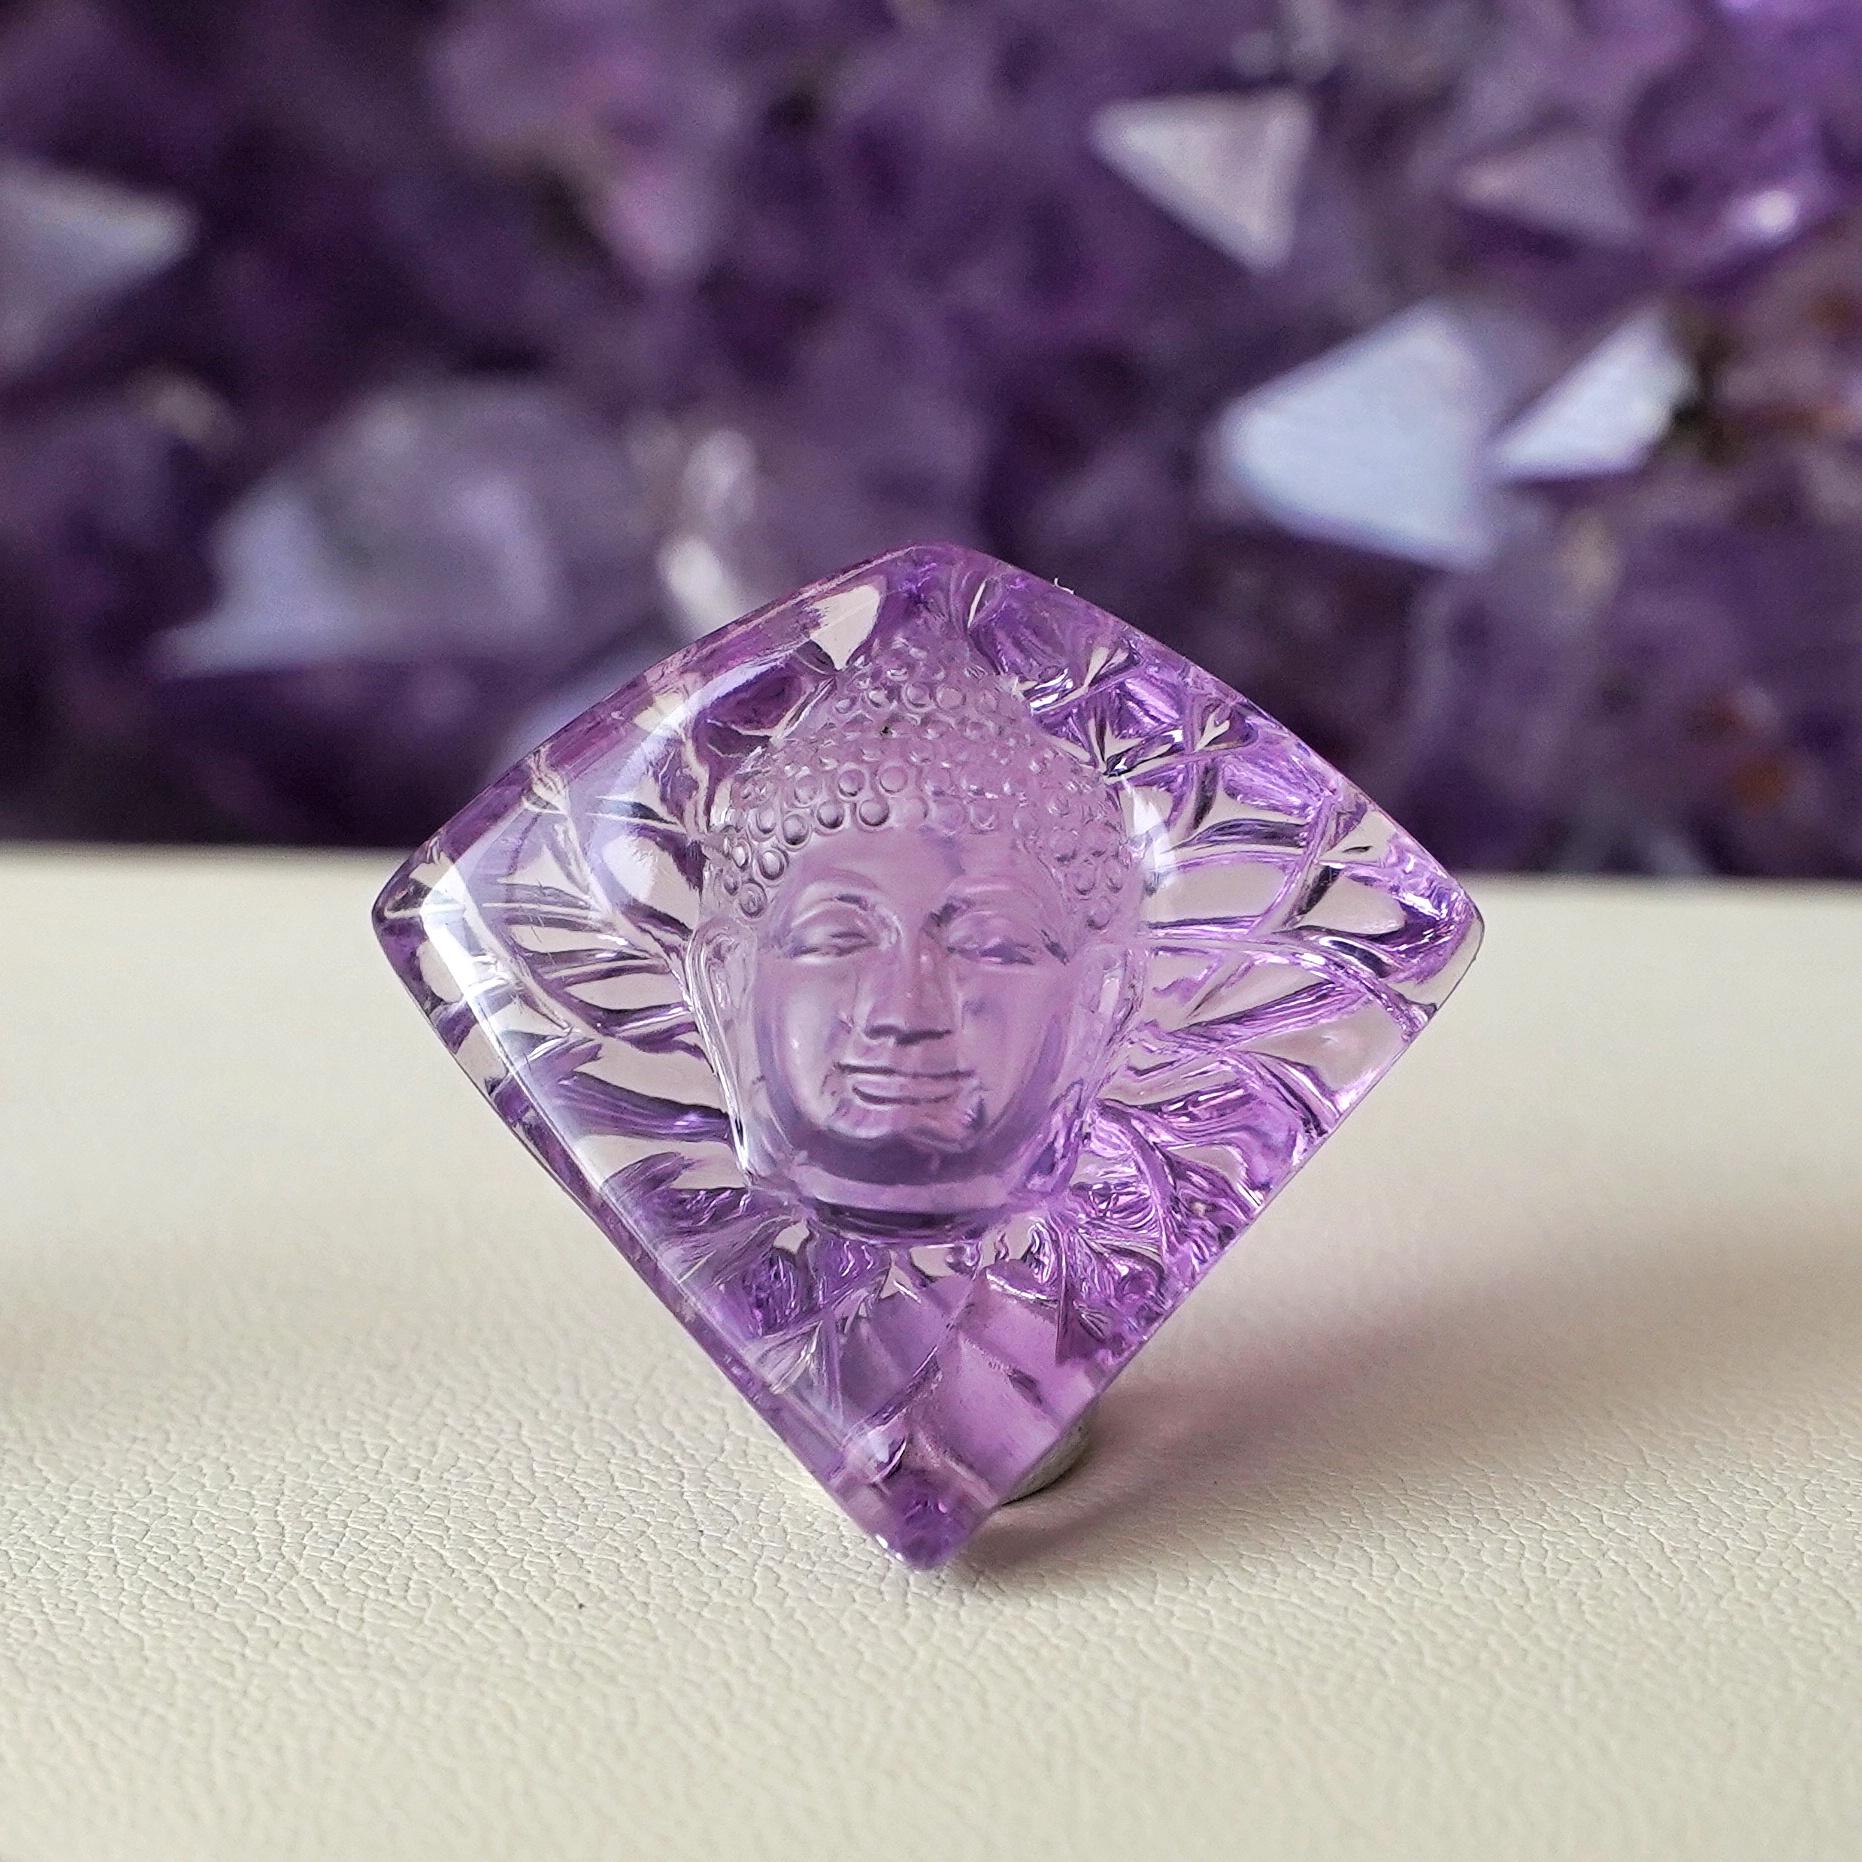 Contemporary Hand-carved 51.01 Carat Buddha Face Brazilian Lavender Amethyst Loose Gemstone For Sale